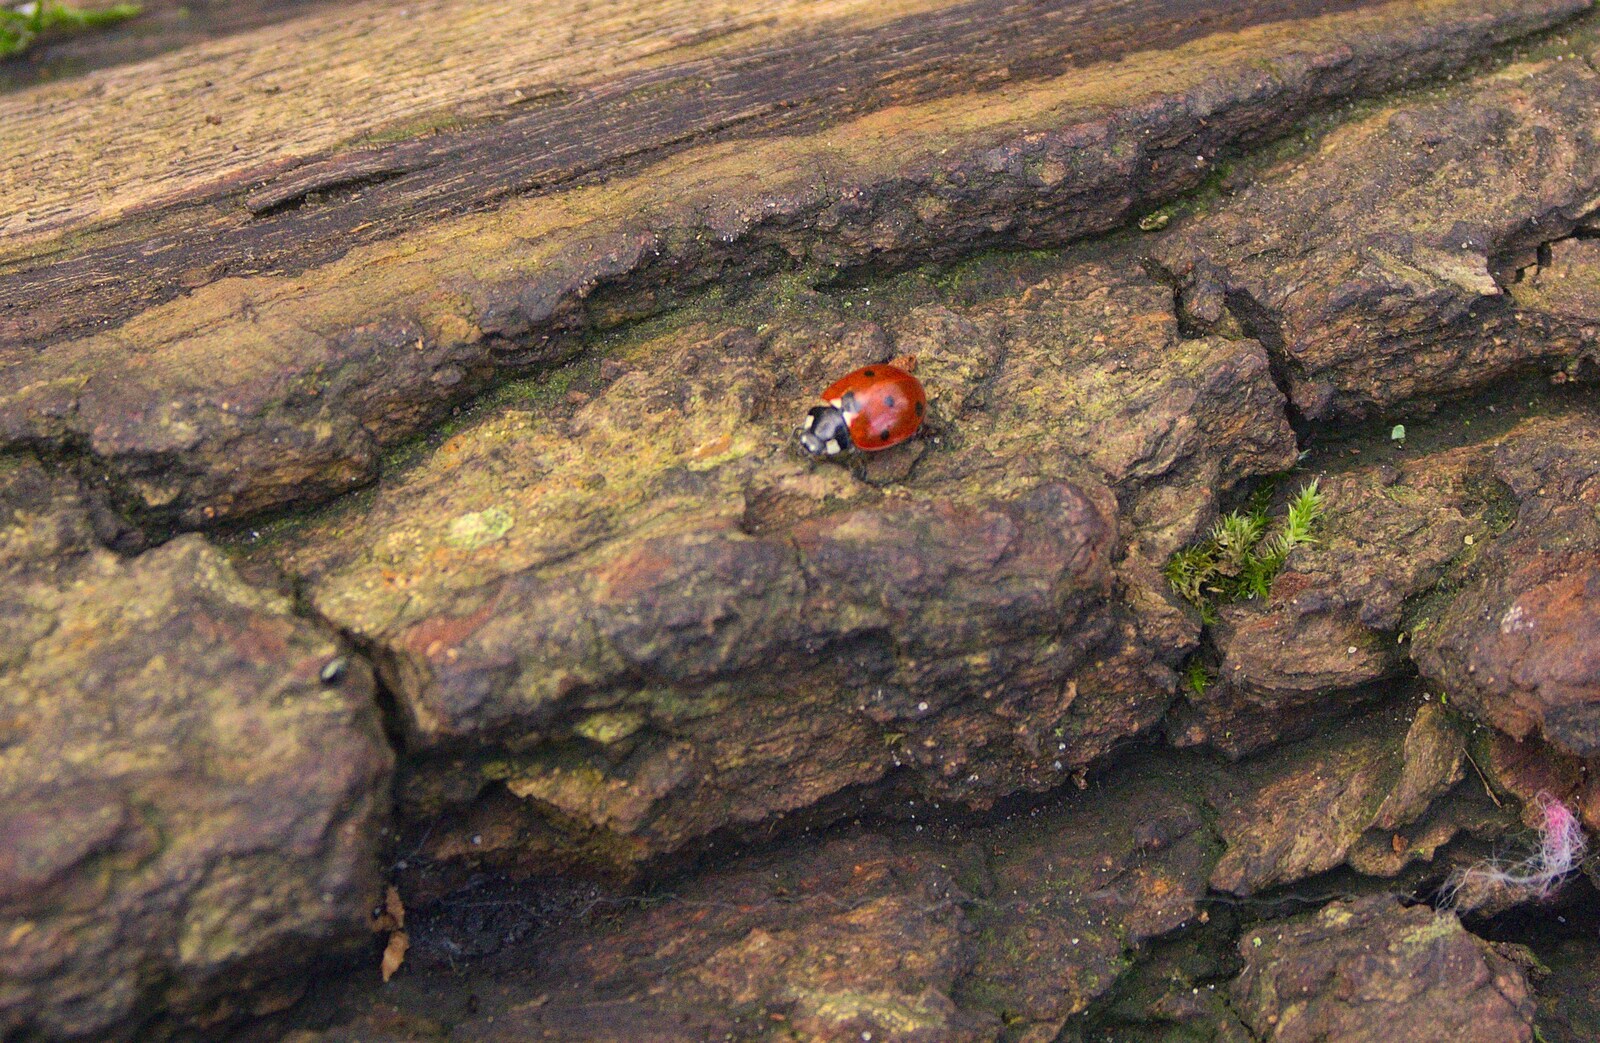 There's a ladybird on a log from A Boxing Day Walk, and a Trip to the Beach, Thornham and Southwold, Suffolk - 26th December 2011